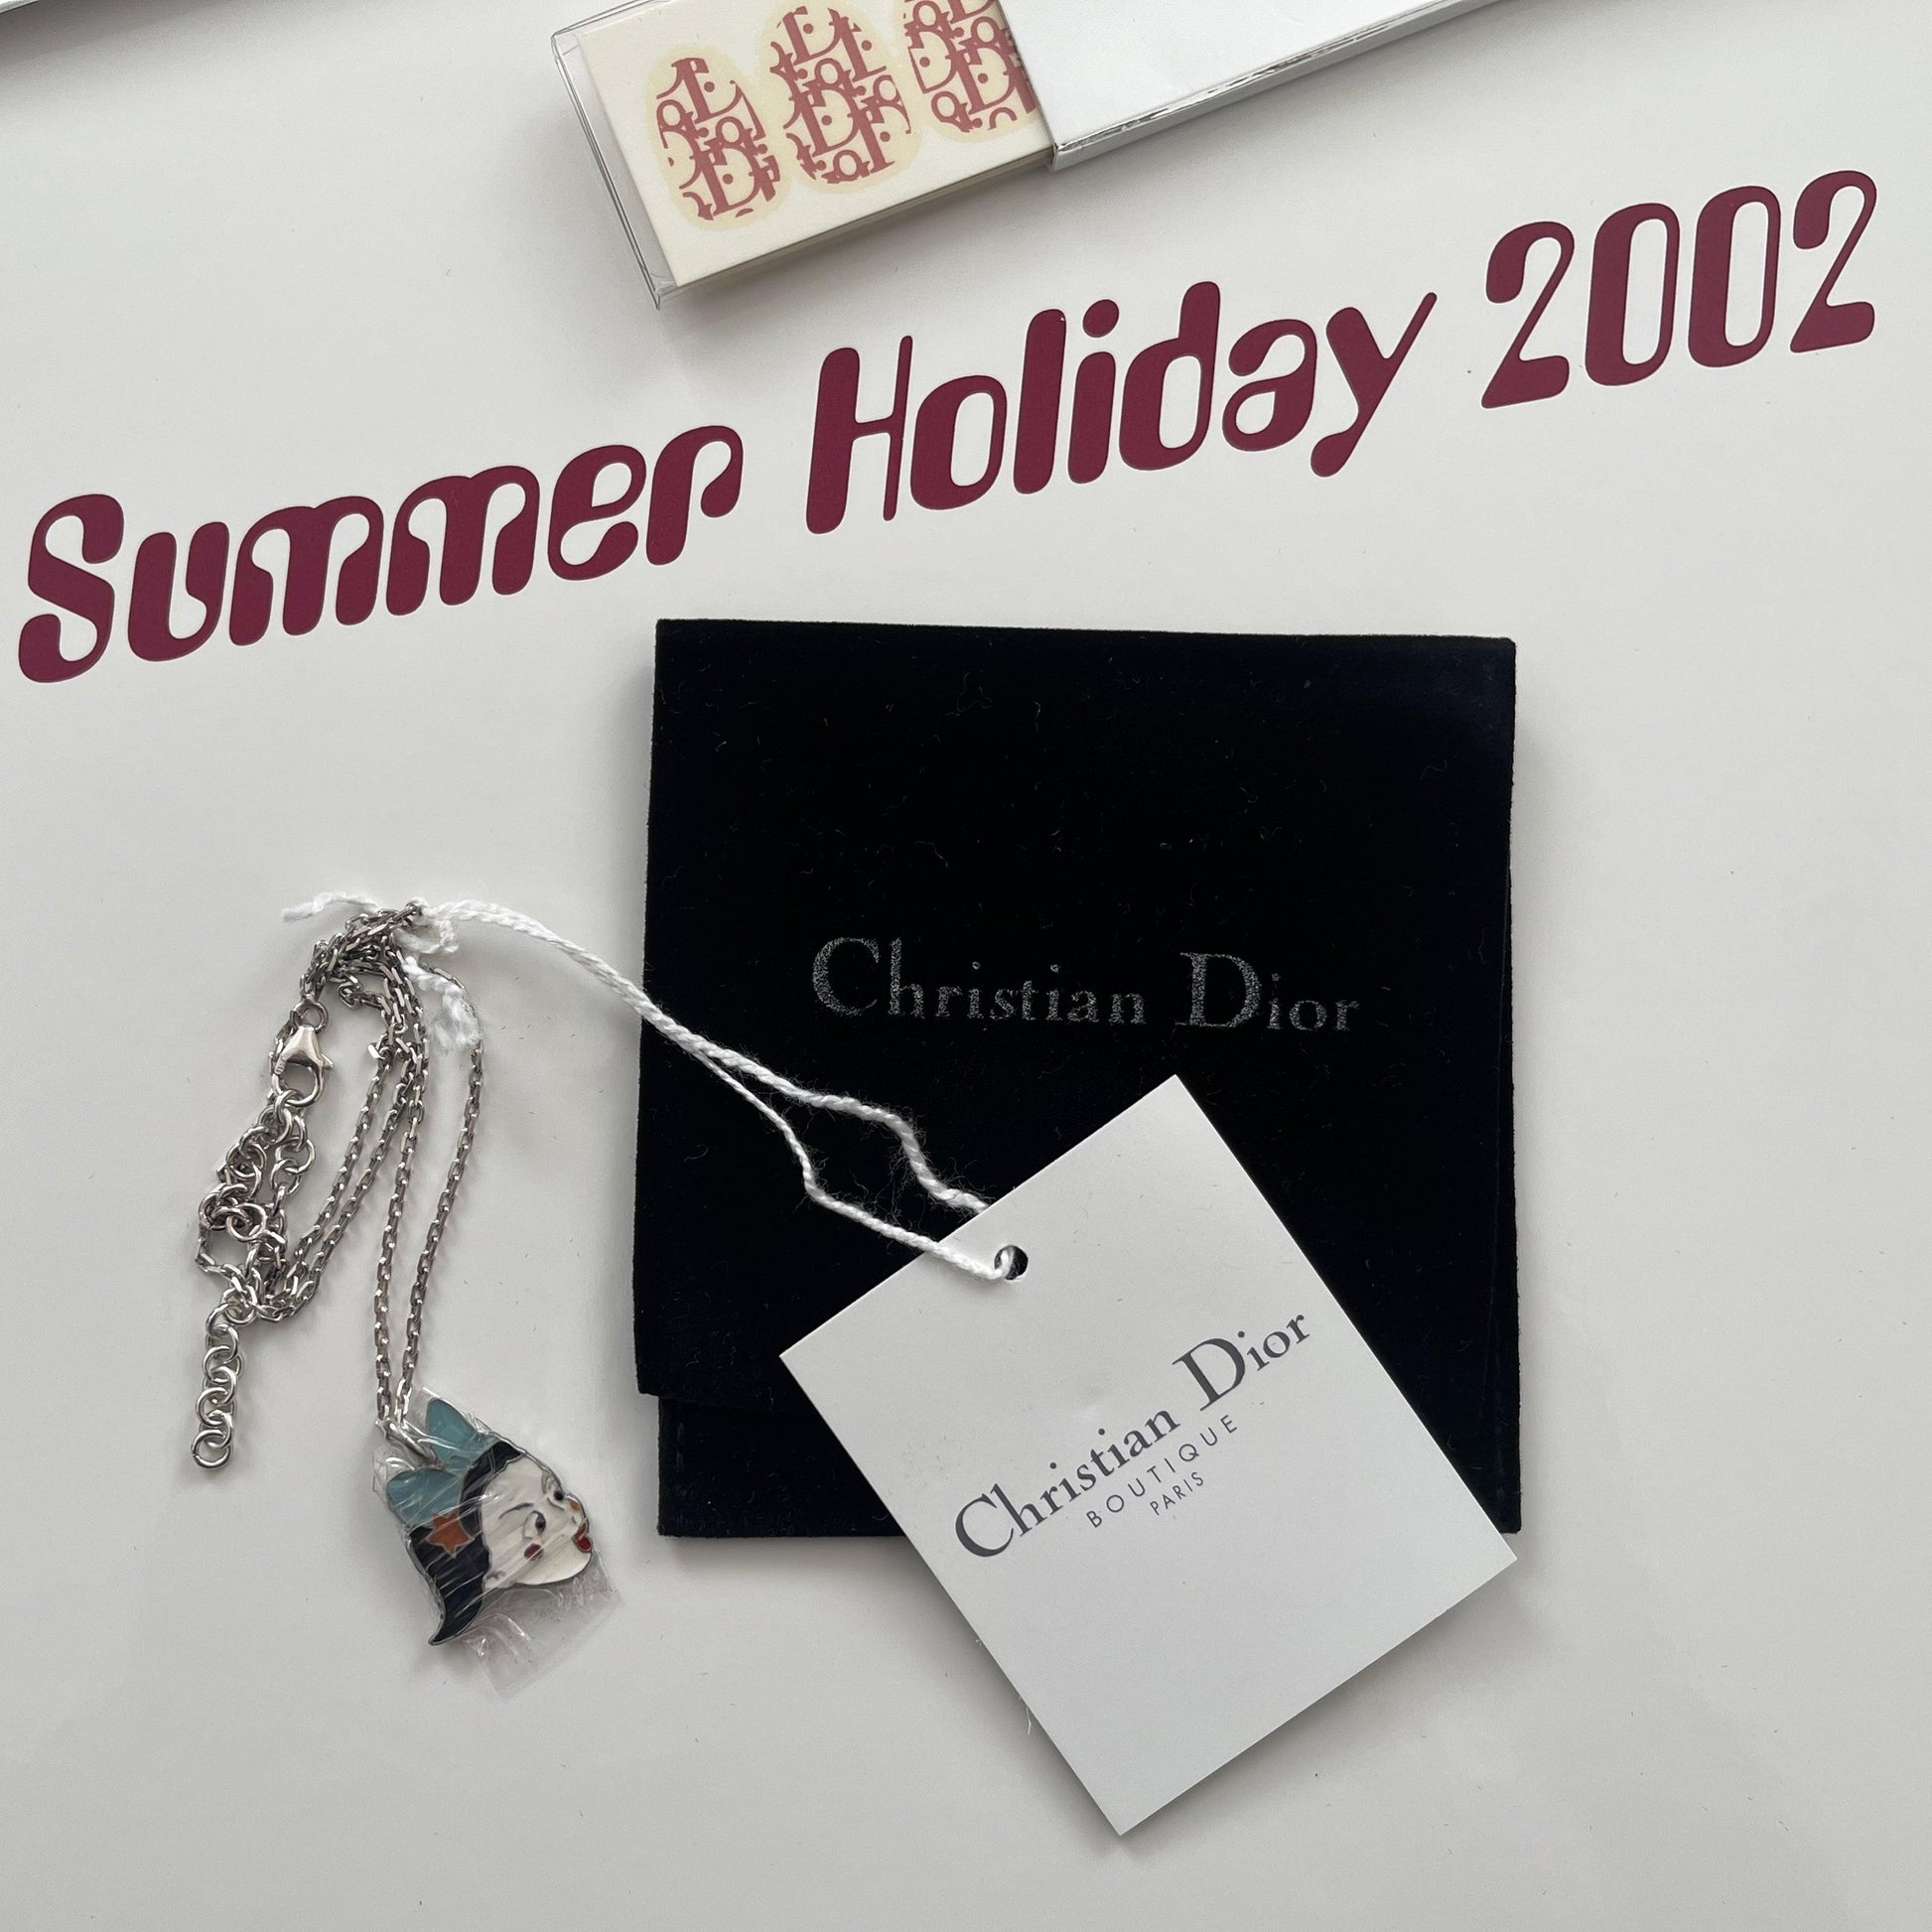 Christian Dior Mermaid T-Shirt Summer Holiday Cruise 2002 - Known Source